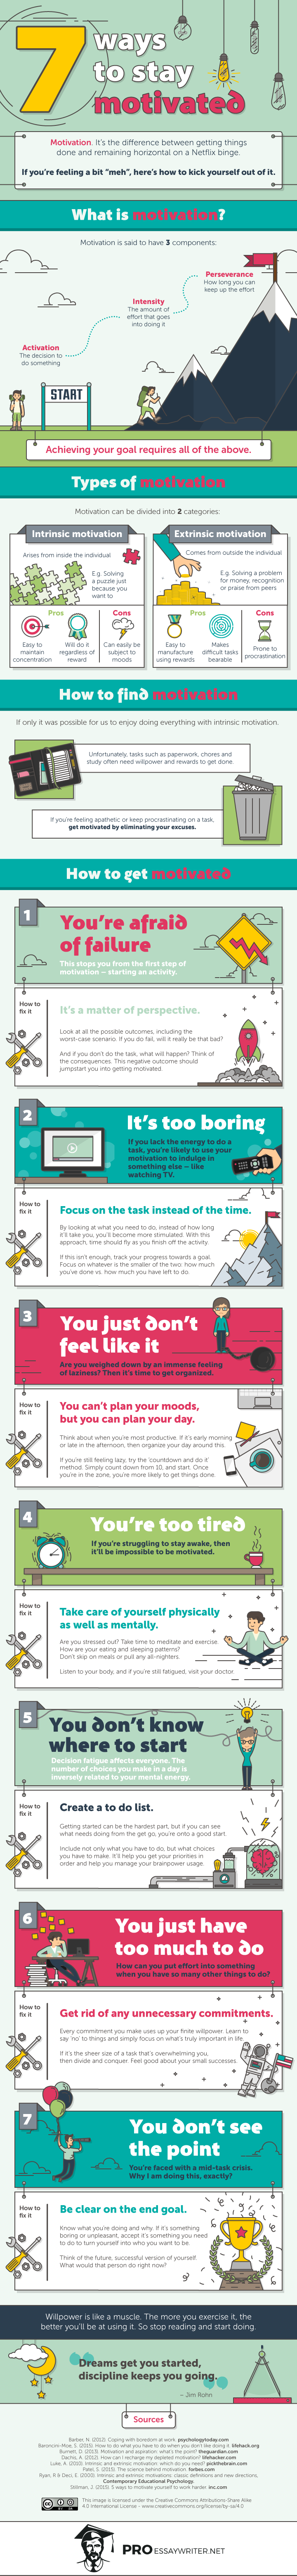 7 ways to stay motivated infographic